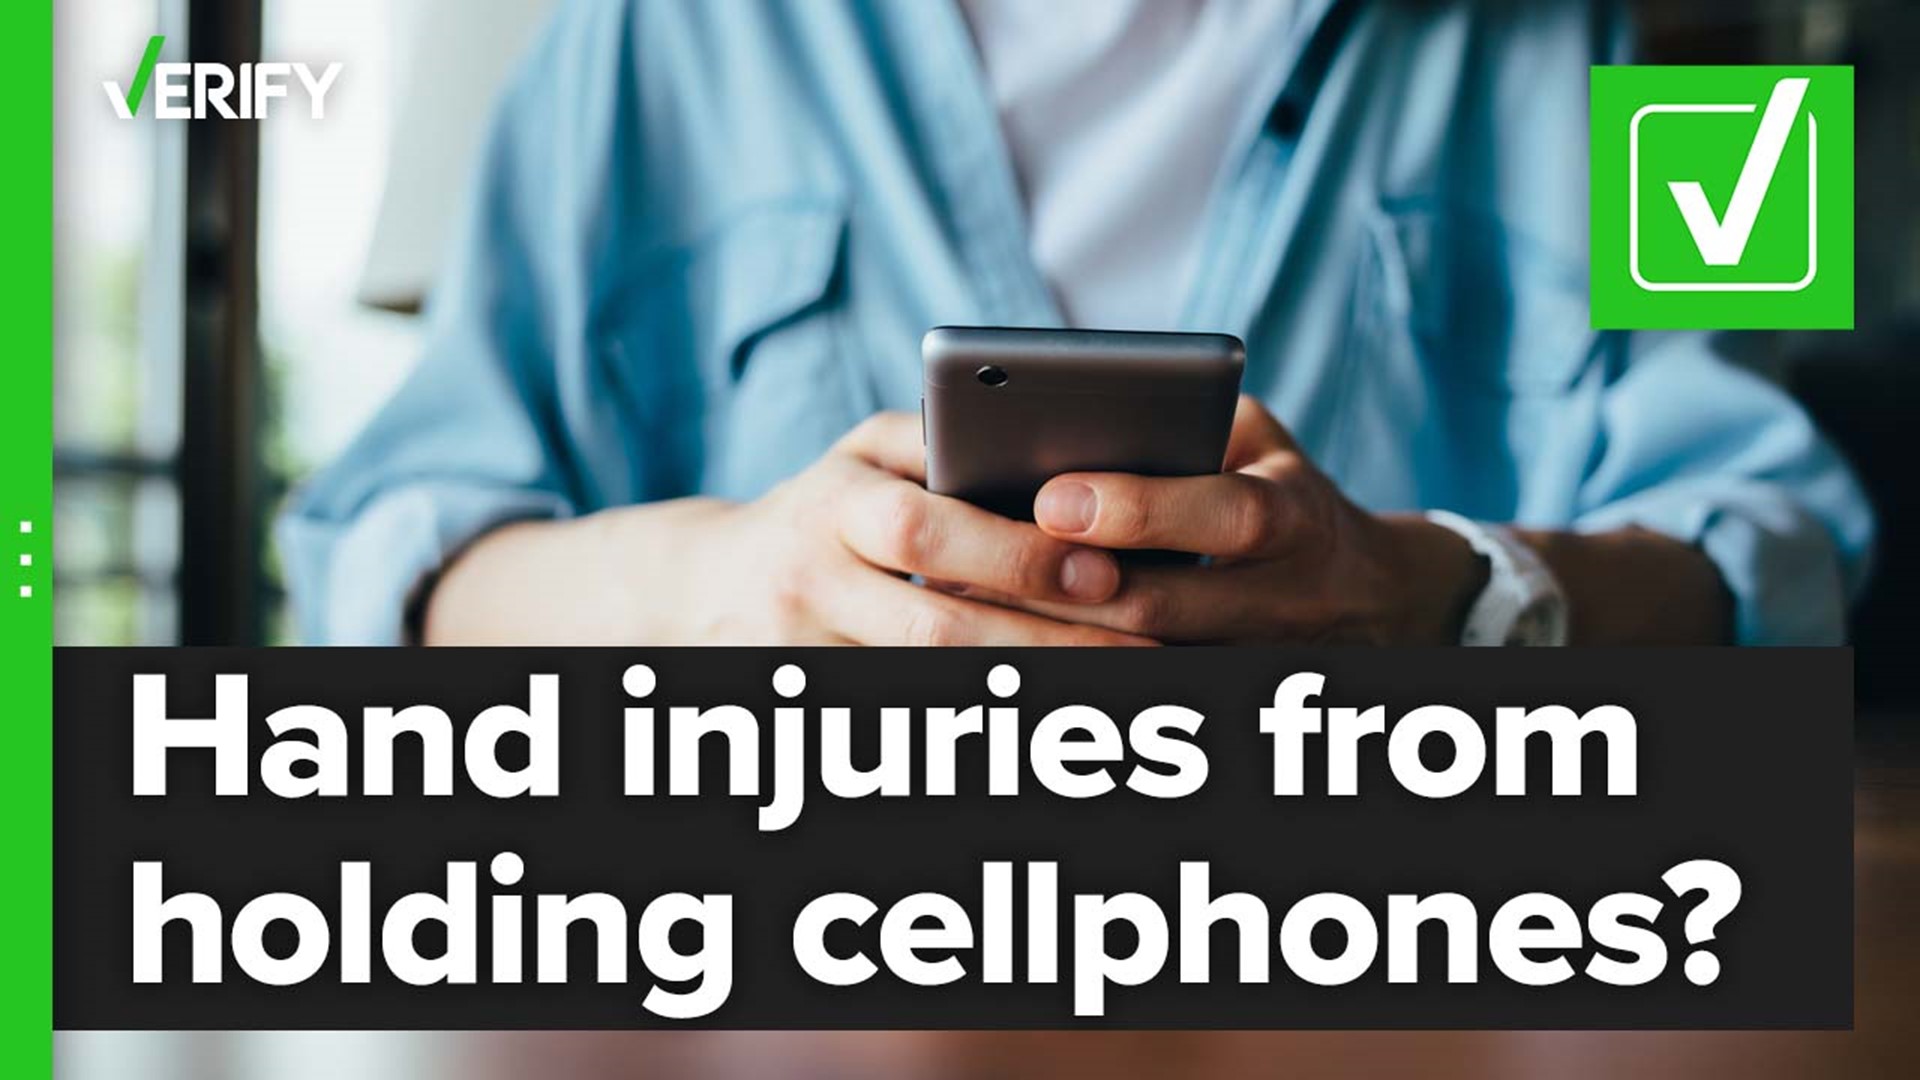 Experts say the simplest ways to avoid cellphone-related hand injuries is by putting your phone down, stretching and taking breaks.